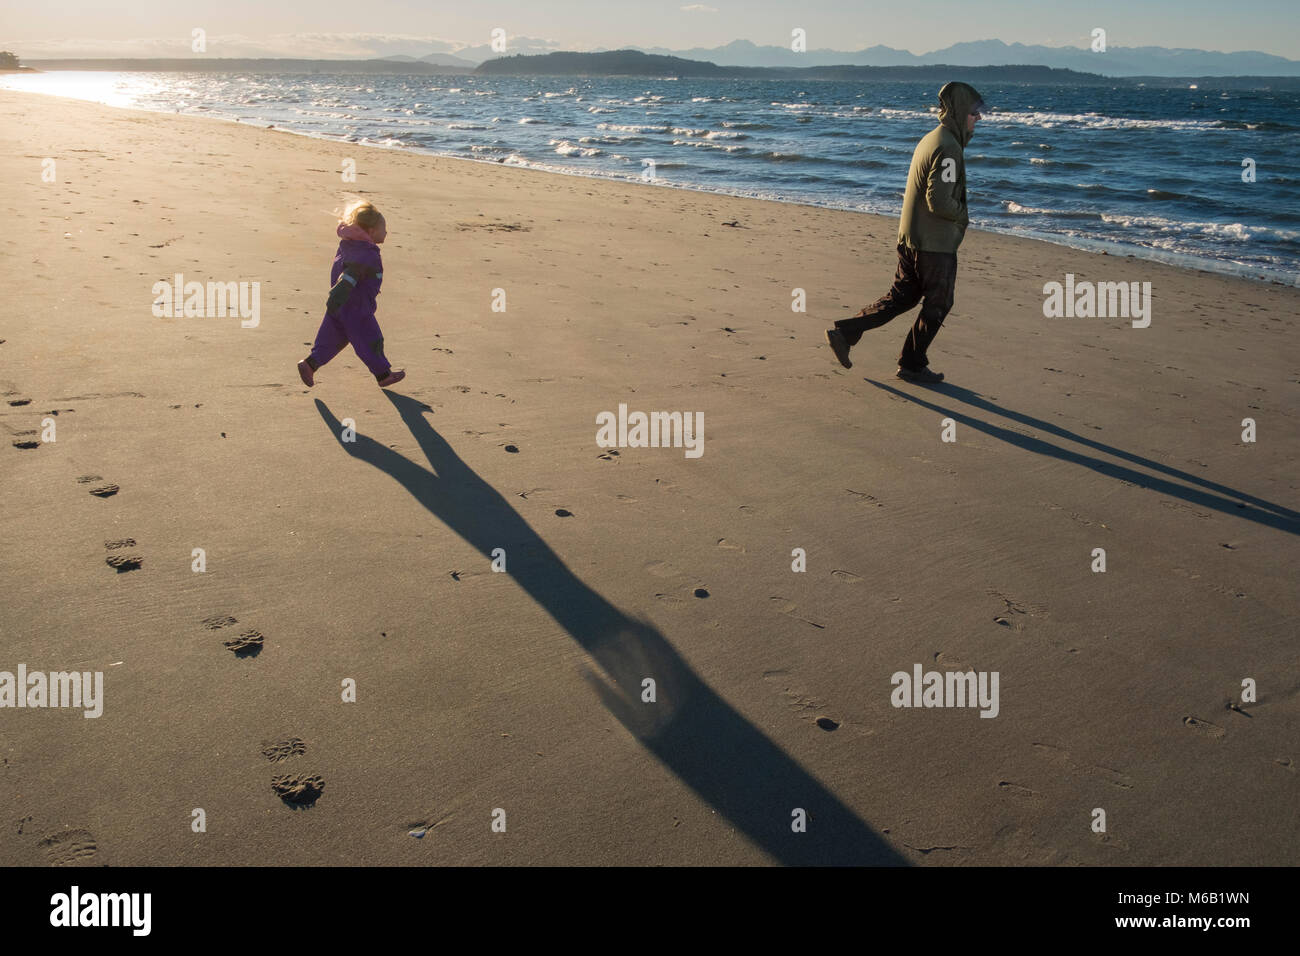 Father and daughter running on beach, Stock Photo